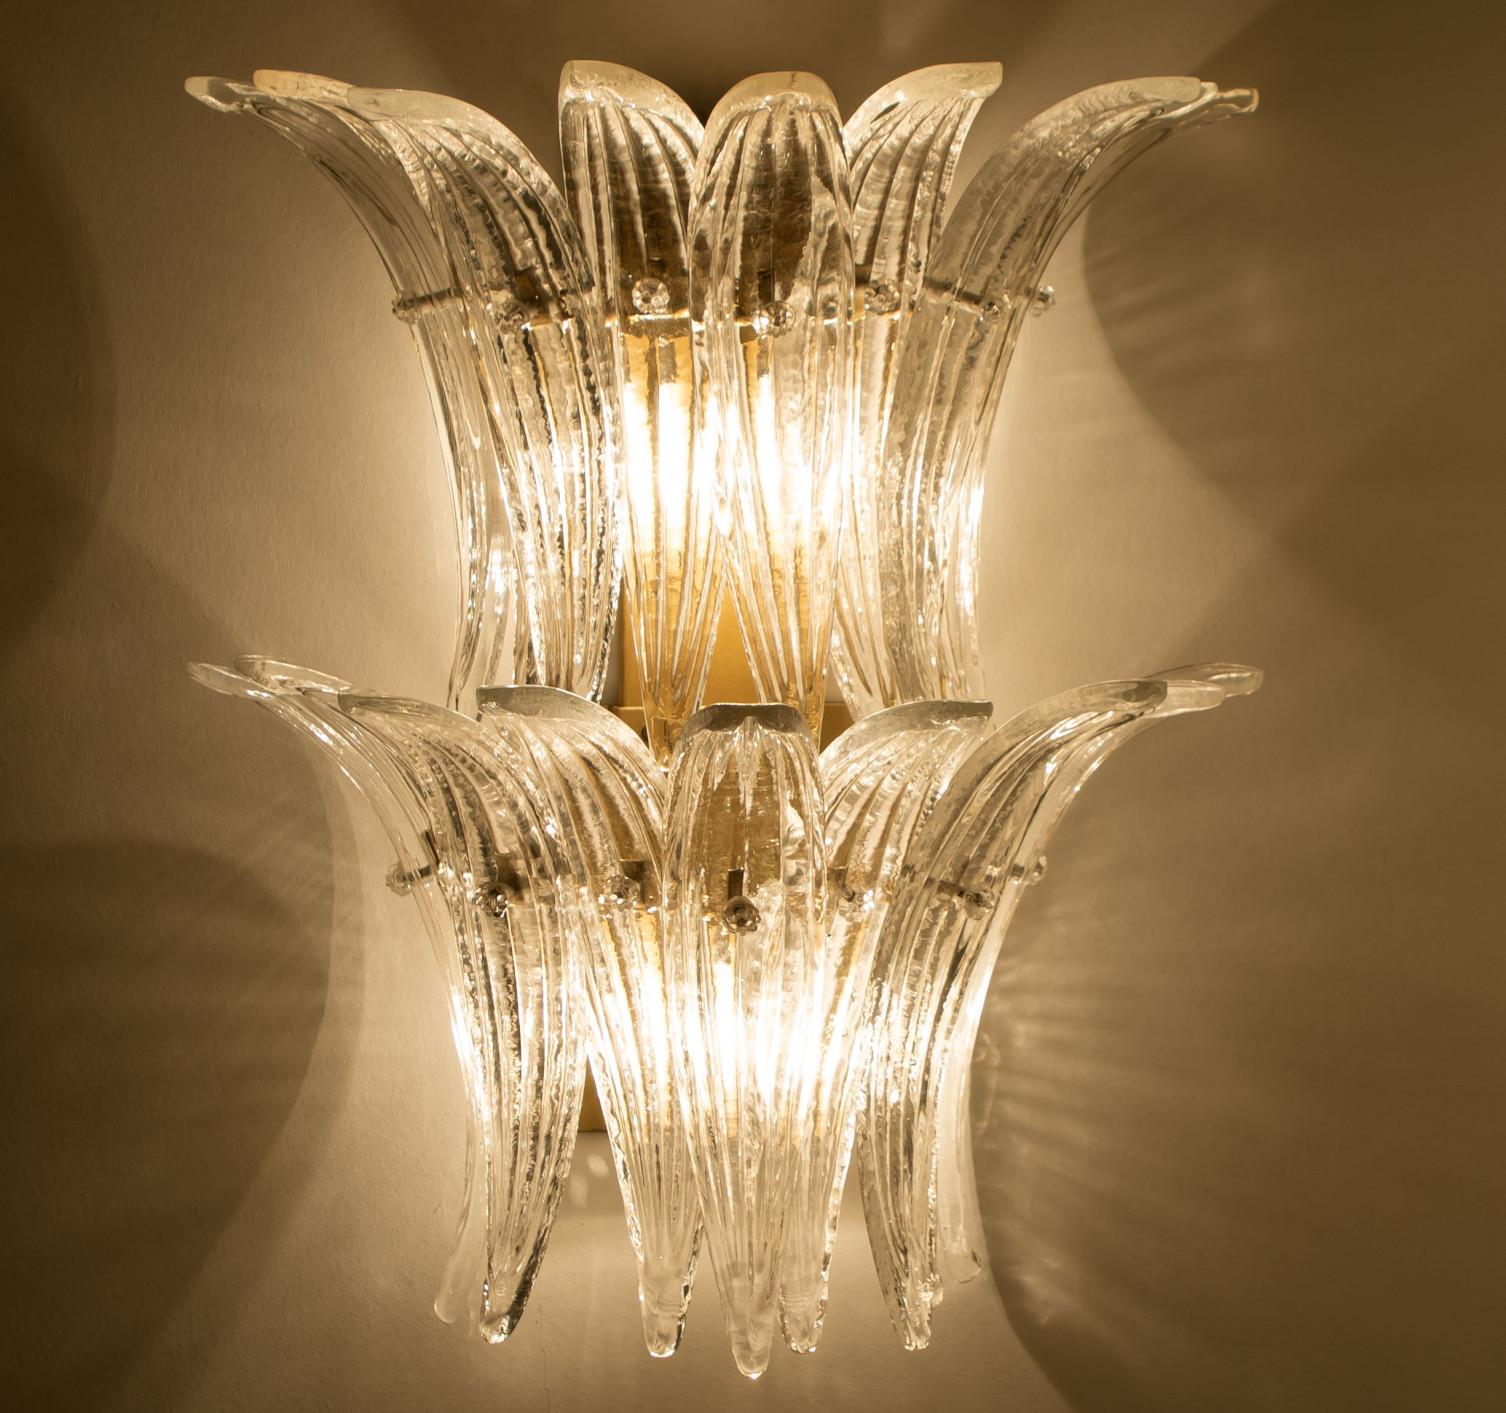 Pair of Beautiful wall lights were designed in the style of Kalmar, featuring a brass base and a rectangular glass cover in opal and clear glass. The glass cover consists of two layers of beautiful palm leaves put together to create a 